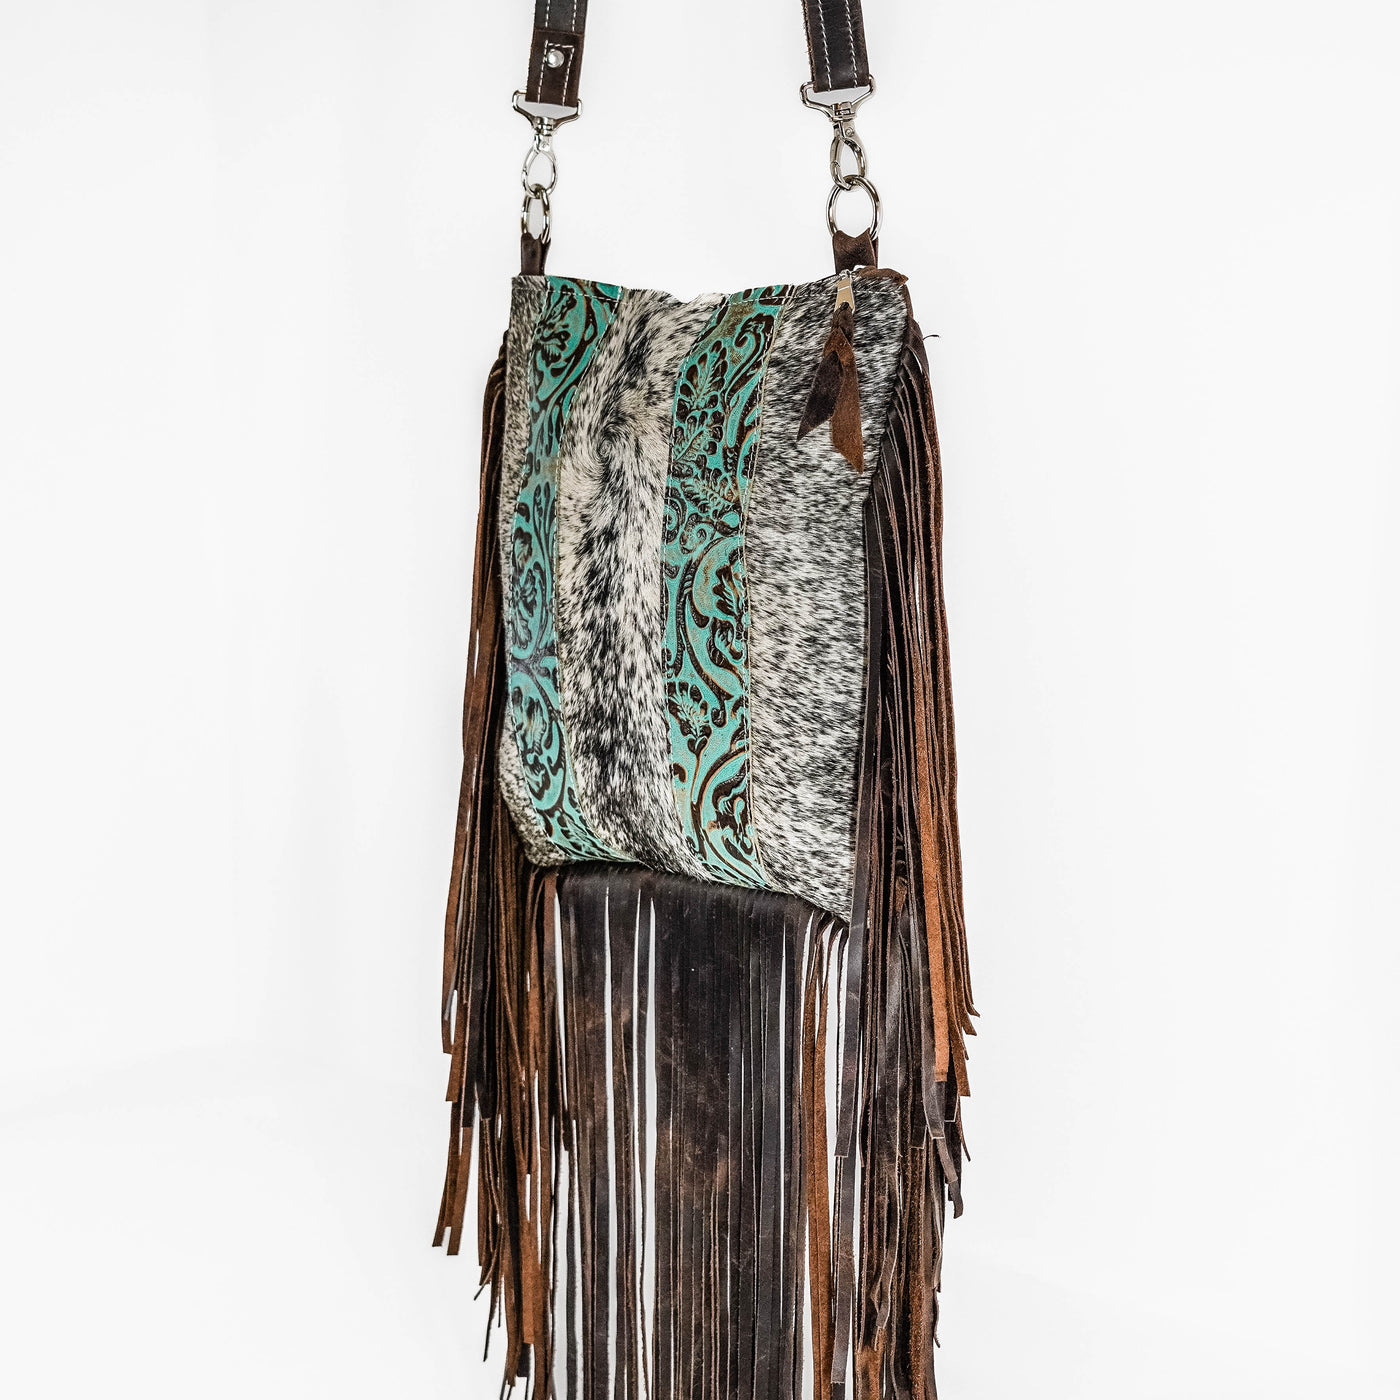 Shania - Black & White w/ Turquoise Tool-Shania-Western-Cowhide-Bags-Handmade-Products-Gifts-Dancing Cactus Designs